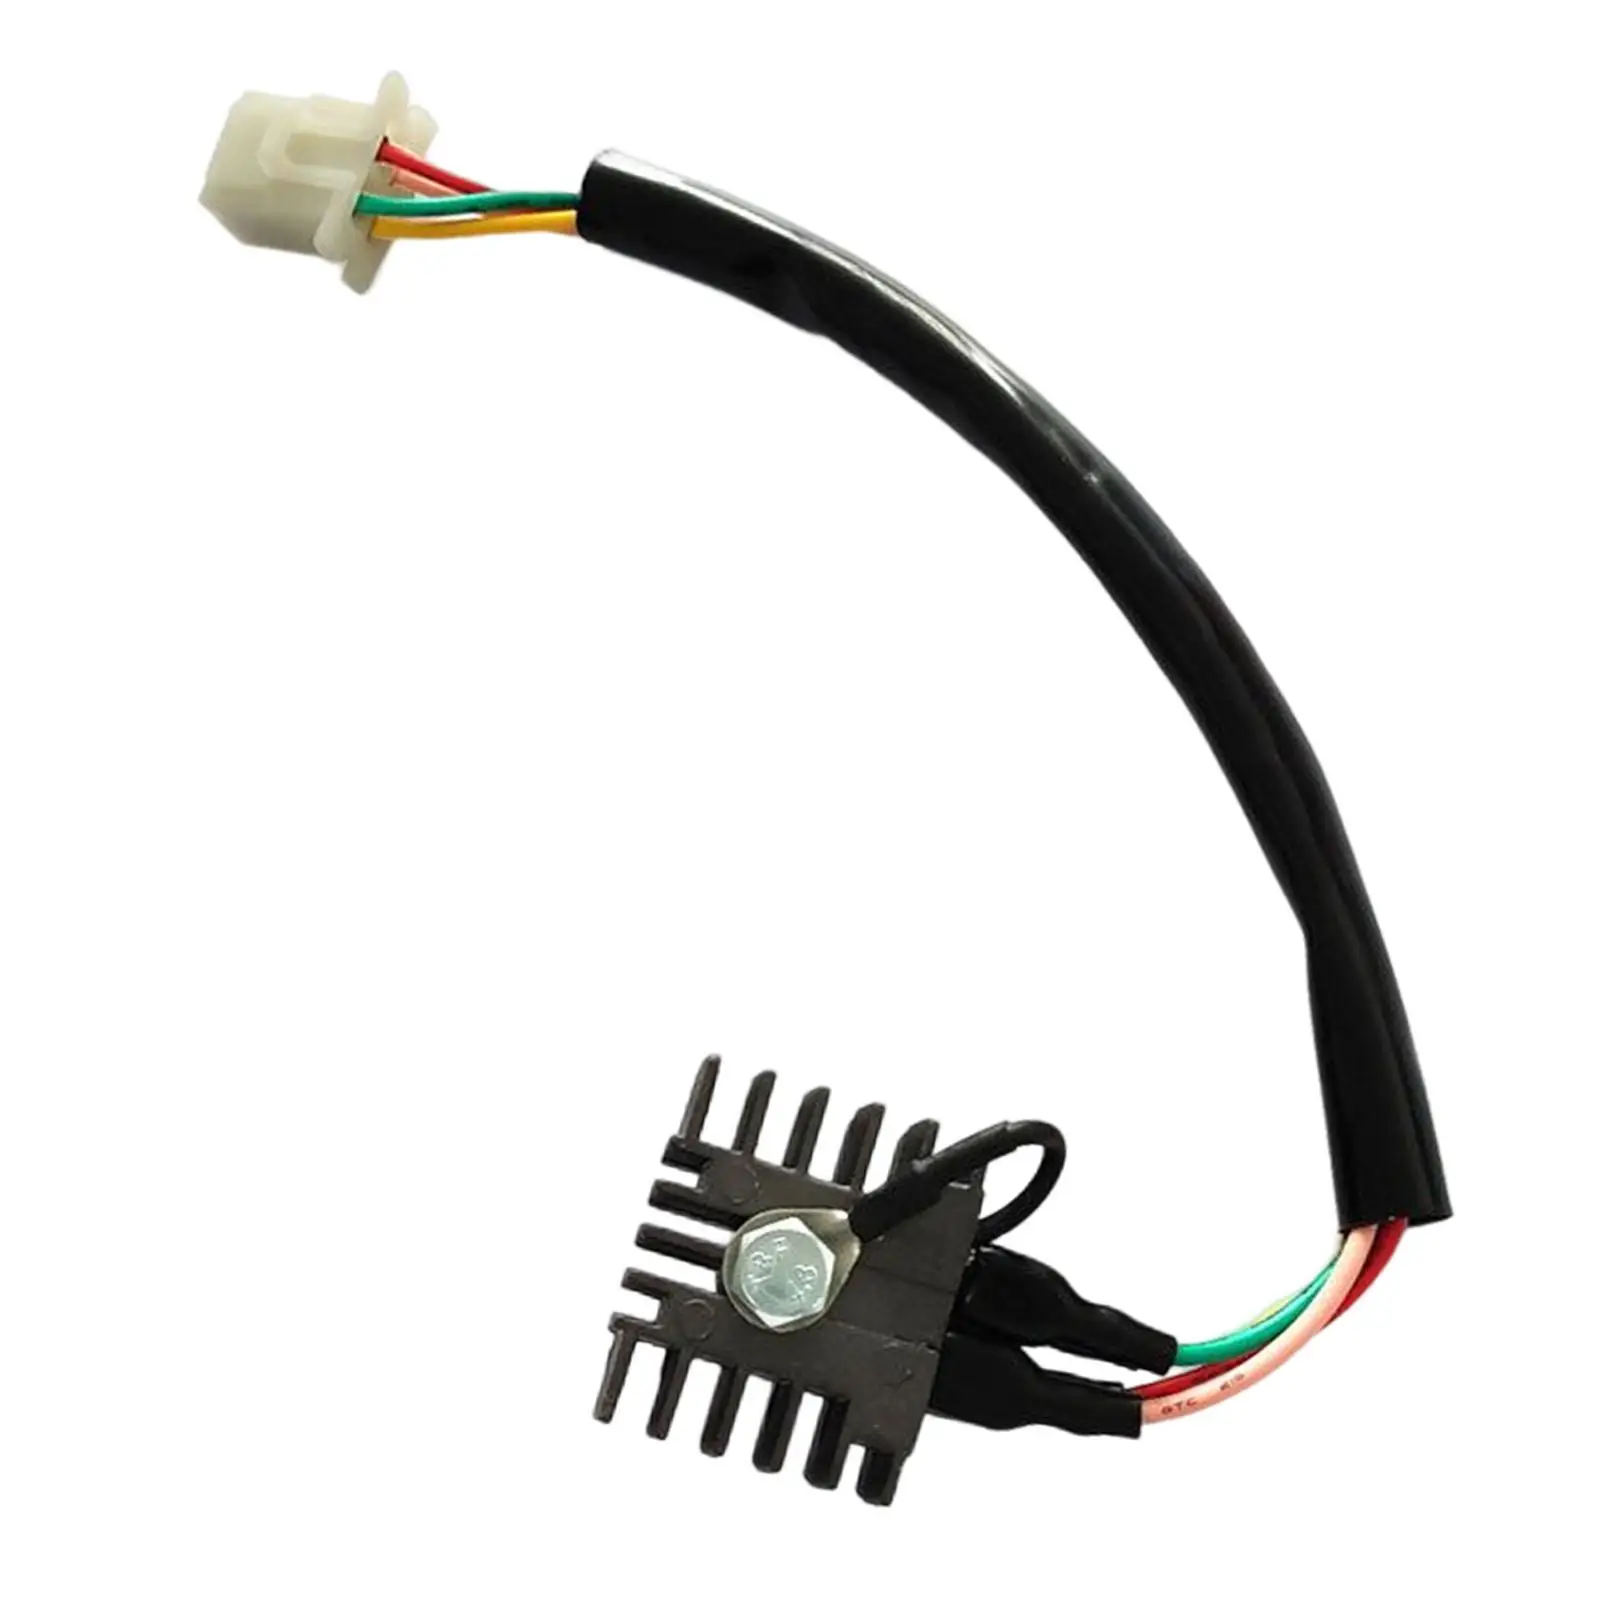 Voltage Regulator Replacement Fits for MT250 CB350 CL450 XL175 CB450 Motorbikes Supplies